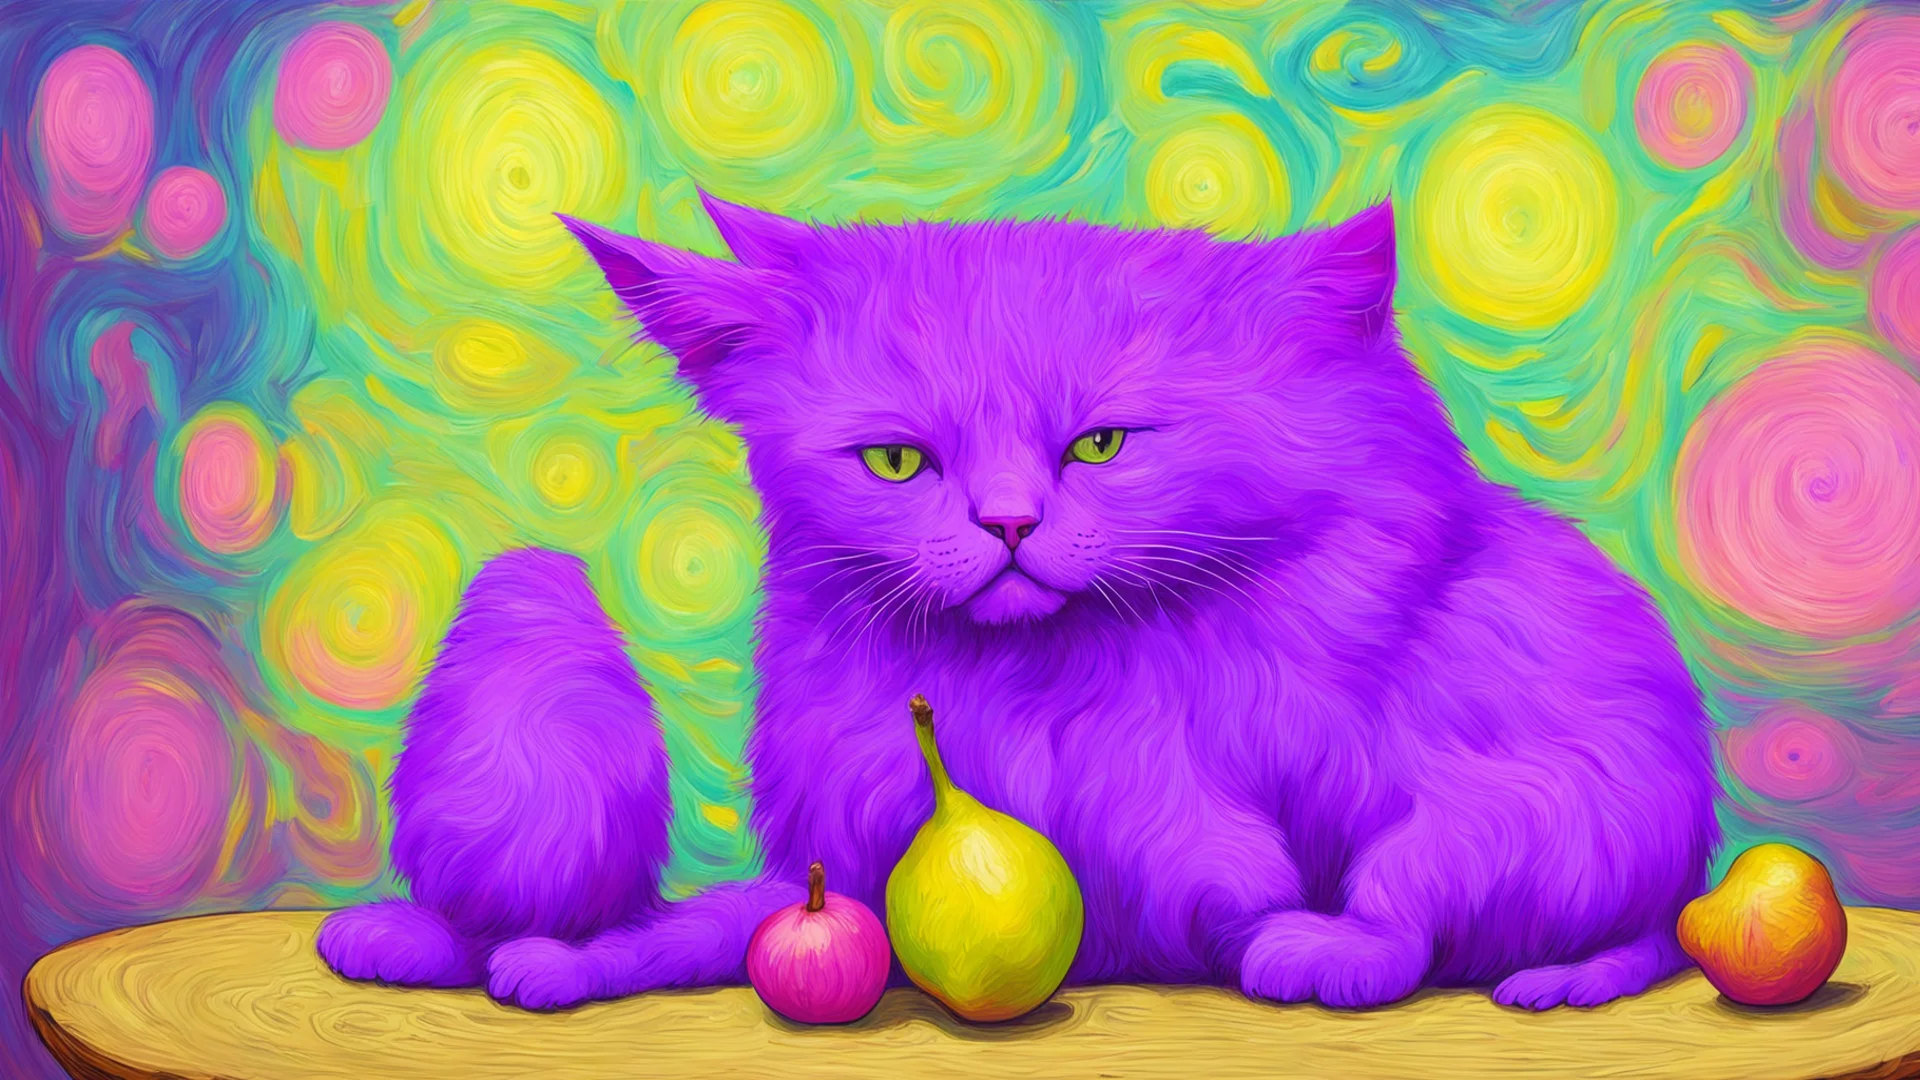 amazing a purple cat with pink strips. the cat is eating a pear. the pear has a face and is looking sad. the background is in vincent van gogh style awesome portrait 2 wide